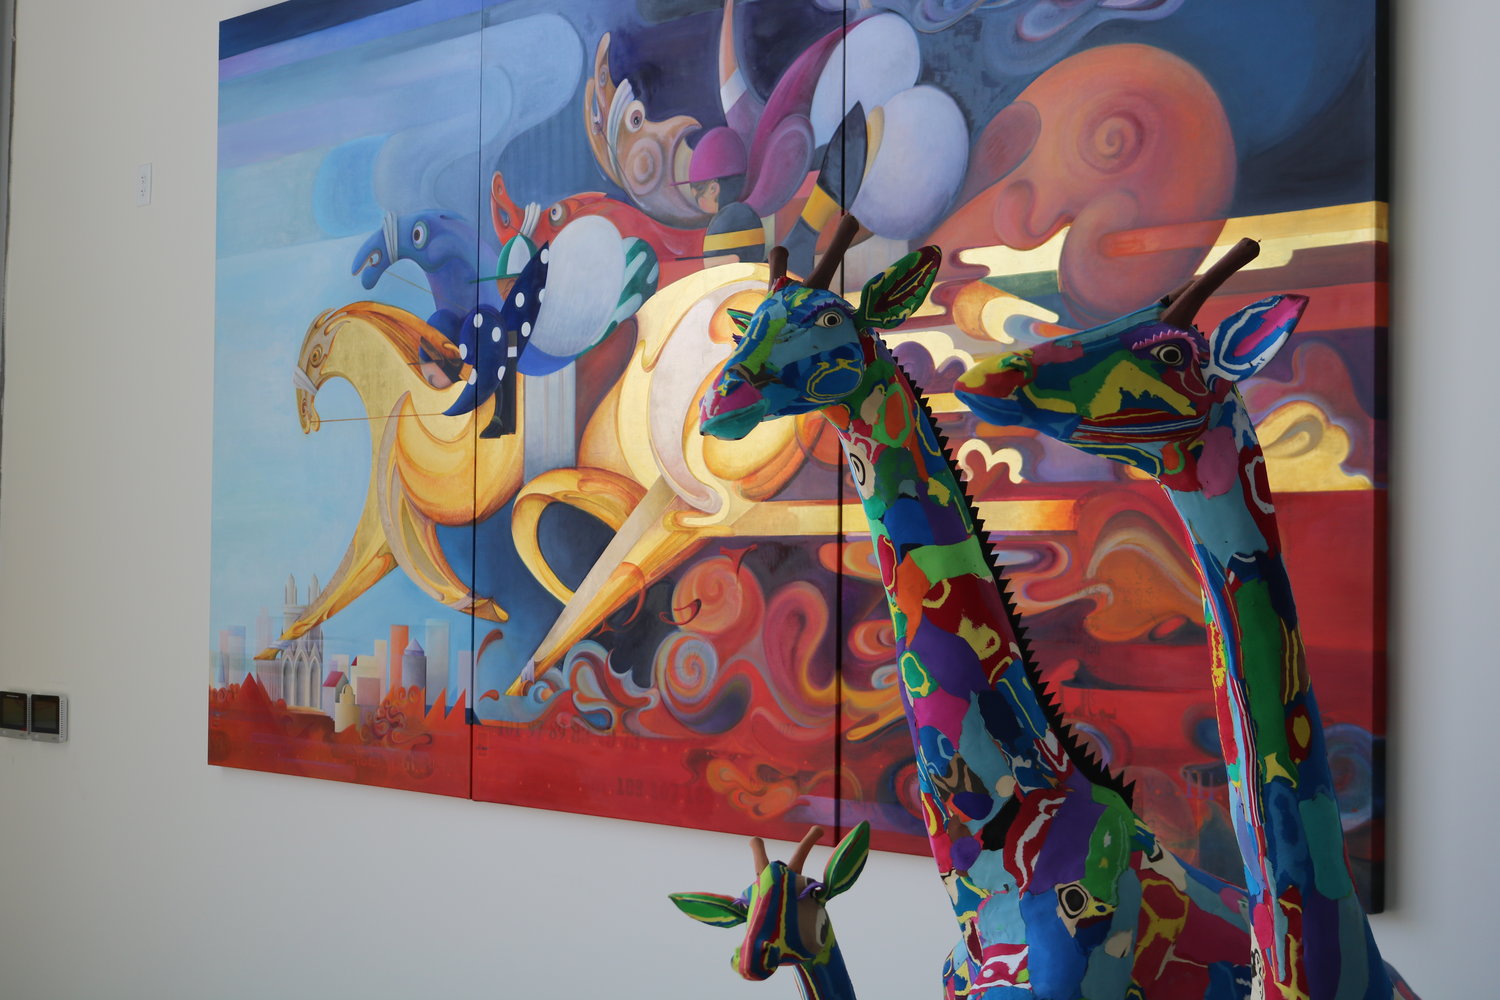 The link showcases the work of some of the area’s most accomplished artists. The giraffes are part of a menagerie of animals created by Ocean Sole from recycled flip-flops. The painting is by Susanne Schuenke.